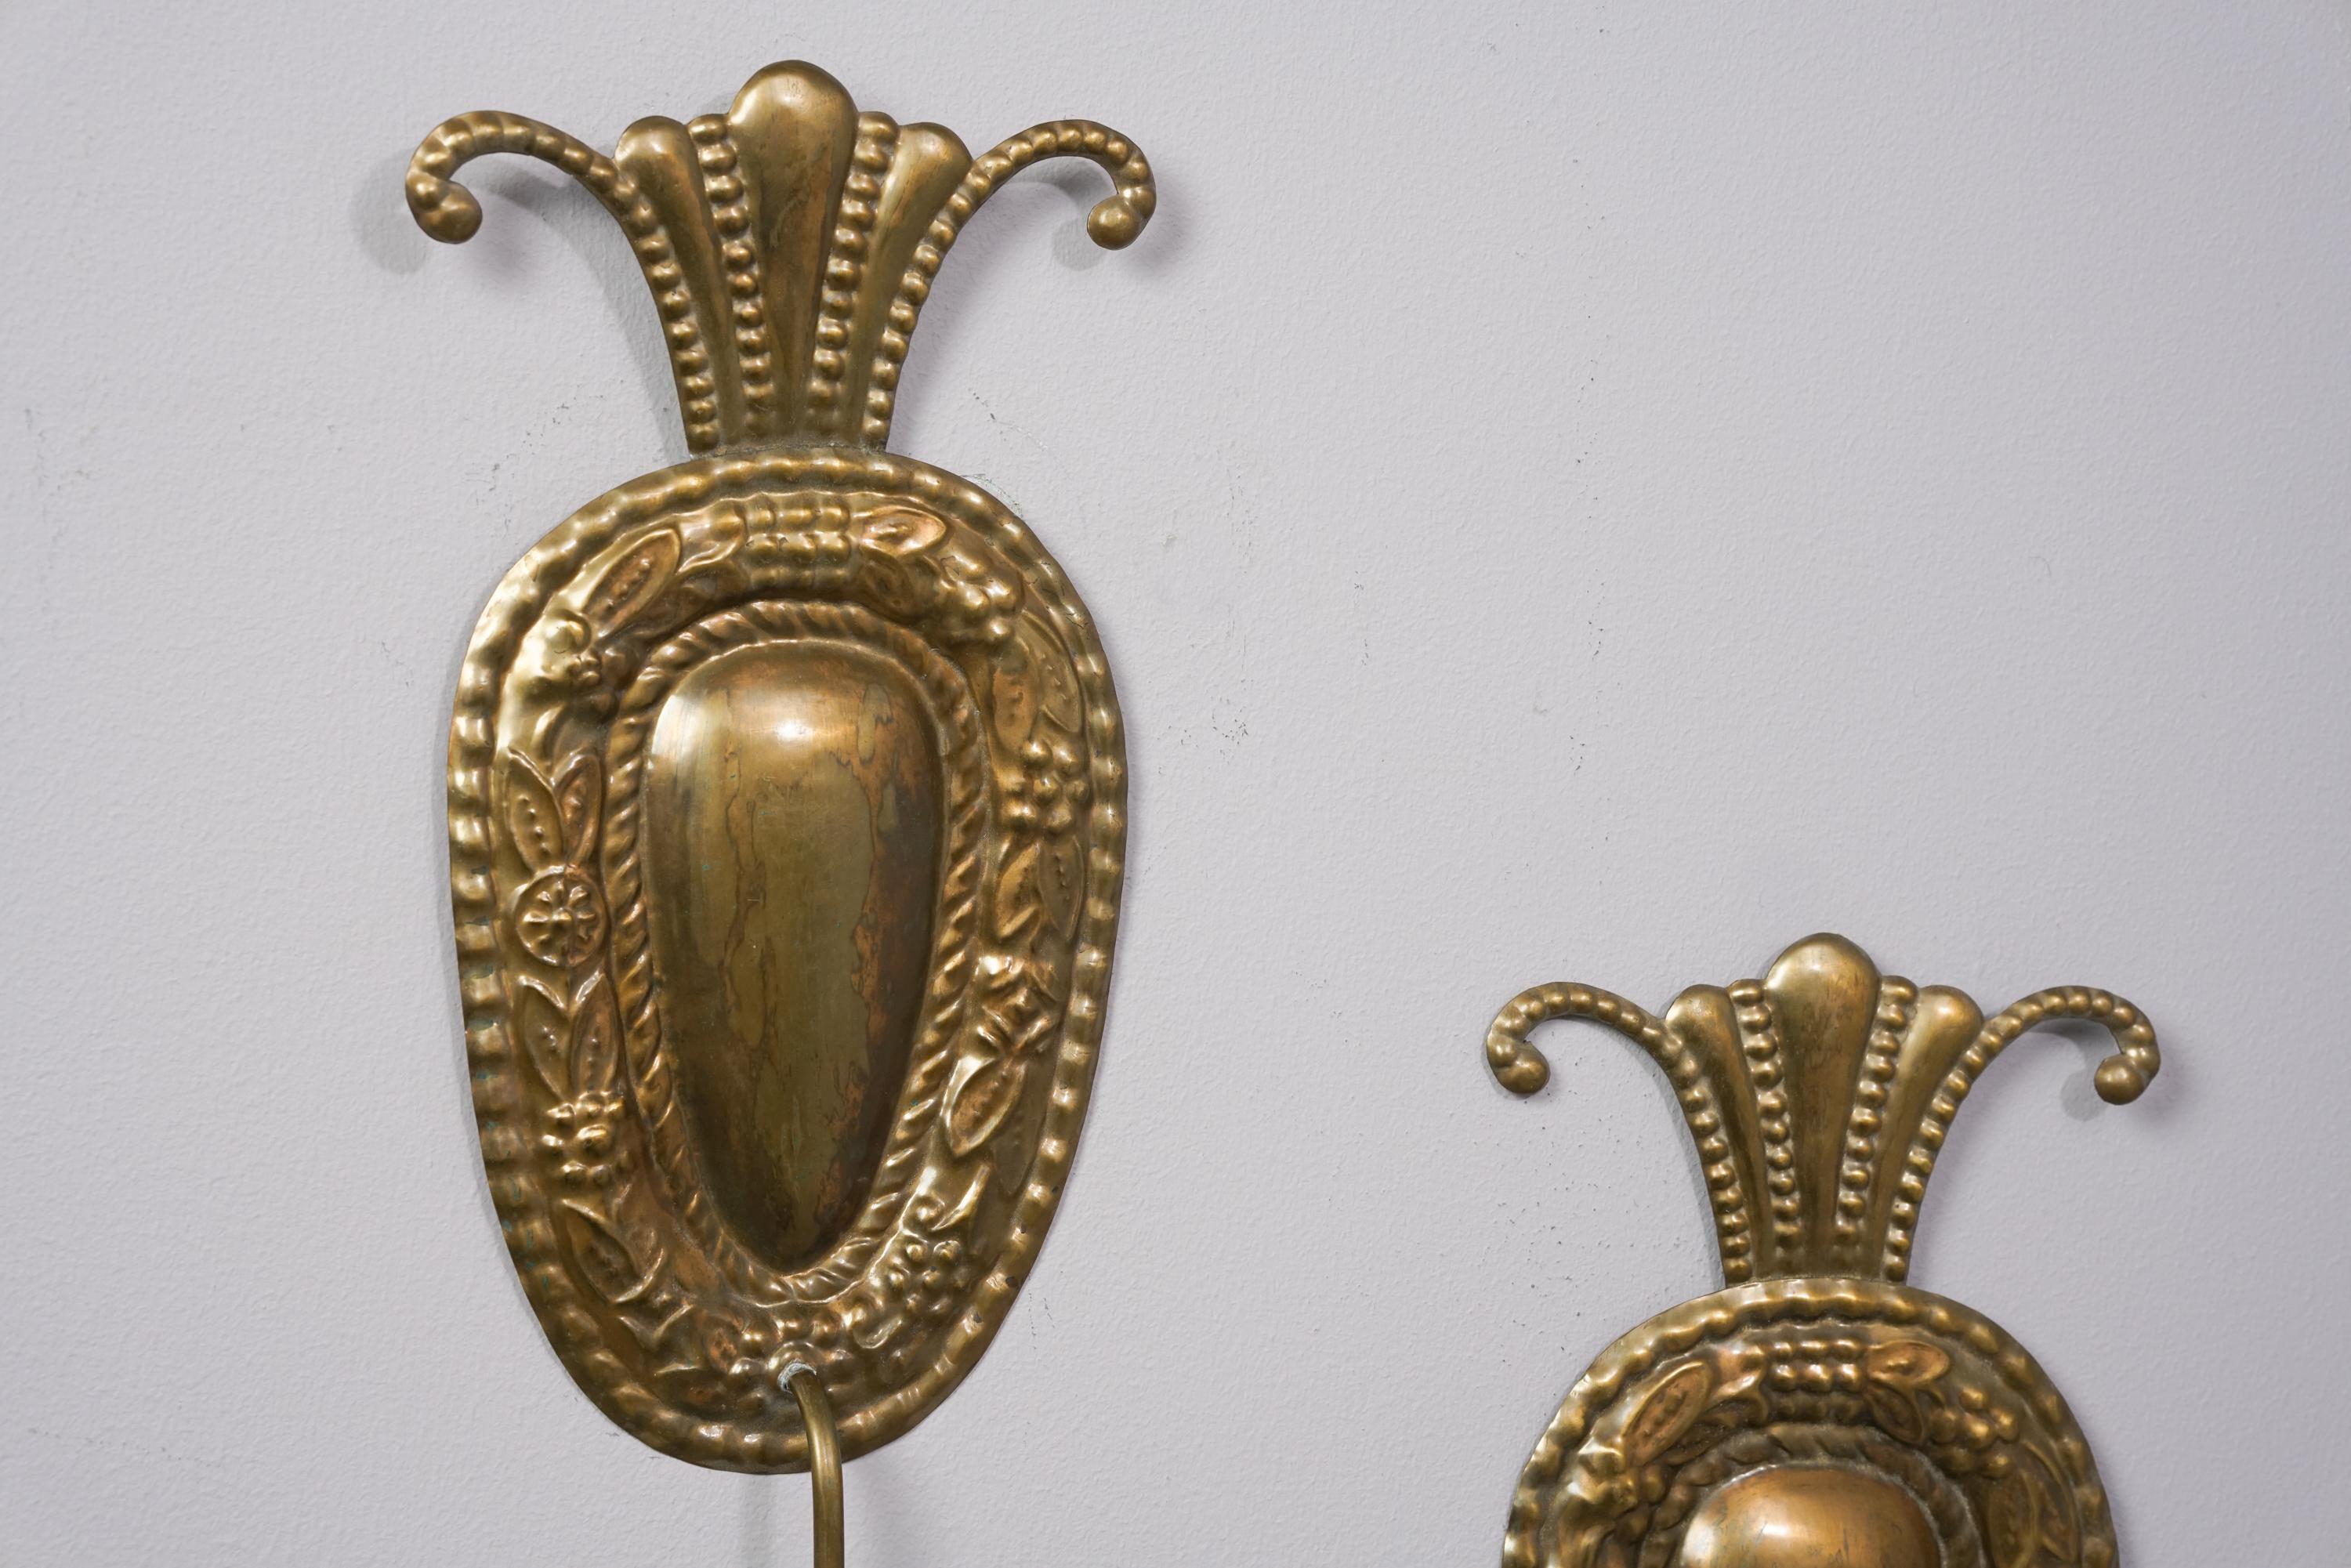 Rare set of two Paavo Tynell Art Deco candle sconces for Taito Oy from the 1920s/1930s. Brass. Good vintage condition, minor wear and patina consistent with age and use. The candle sconces are sold as a set.